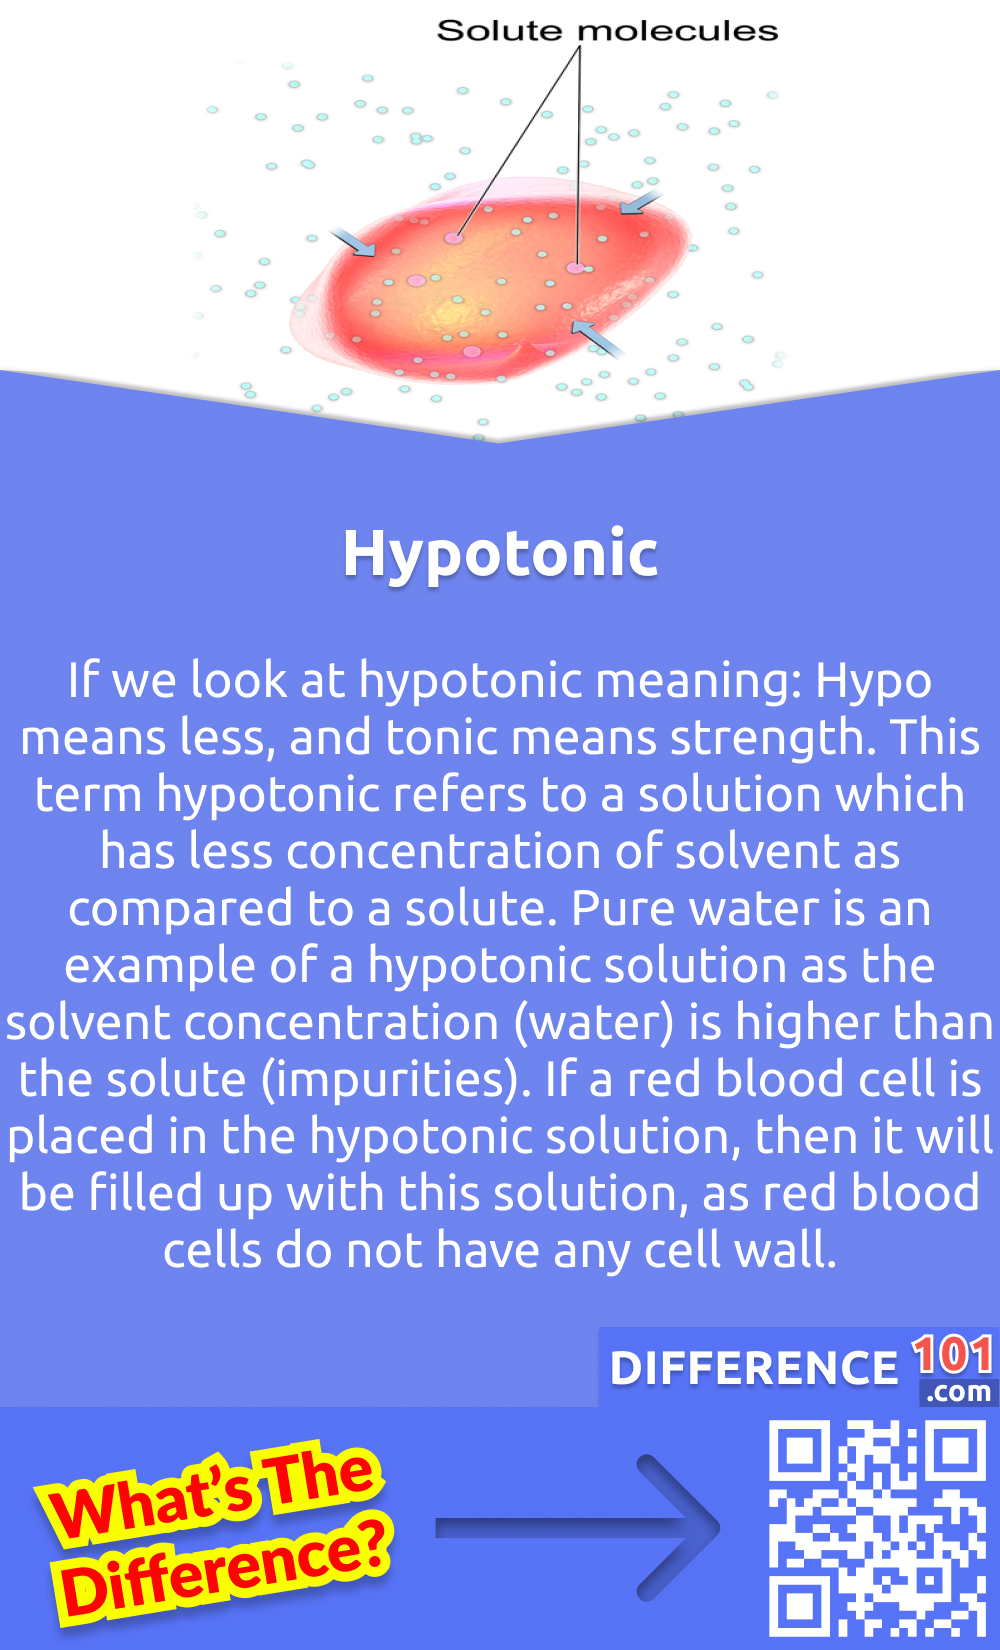 What Is Hypotonic? If we look at hypotonic meaning: Hypo means less, and tonic means strength. This term hypotonic refers to a solution which has less concentration of solvent as compared to a solute. Pure water is an example of a hypotonic solution as the solvent concentration (water) is higher than the solute (impurities). If a red blood cell is placed in the hypotonic solution, then it will be filled up with this solution, as red blood cells do not have any cell wall. The solution starts to fill up and produce a high pressure which can cause the bursting of the red blood cells. And when a plant cell is placed under the hypotonic solution, the central part of the vacuole of the plant takes up all the additional water and tugs the cell membrane against the cell wall. But due to the rigid nature of the cell, it drags back and reduces the risk of bursting.